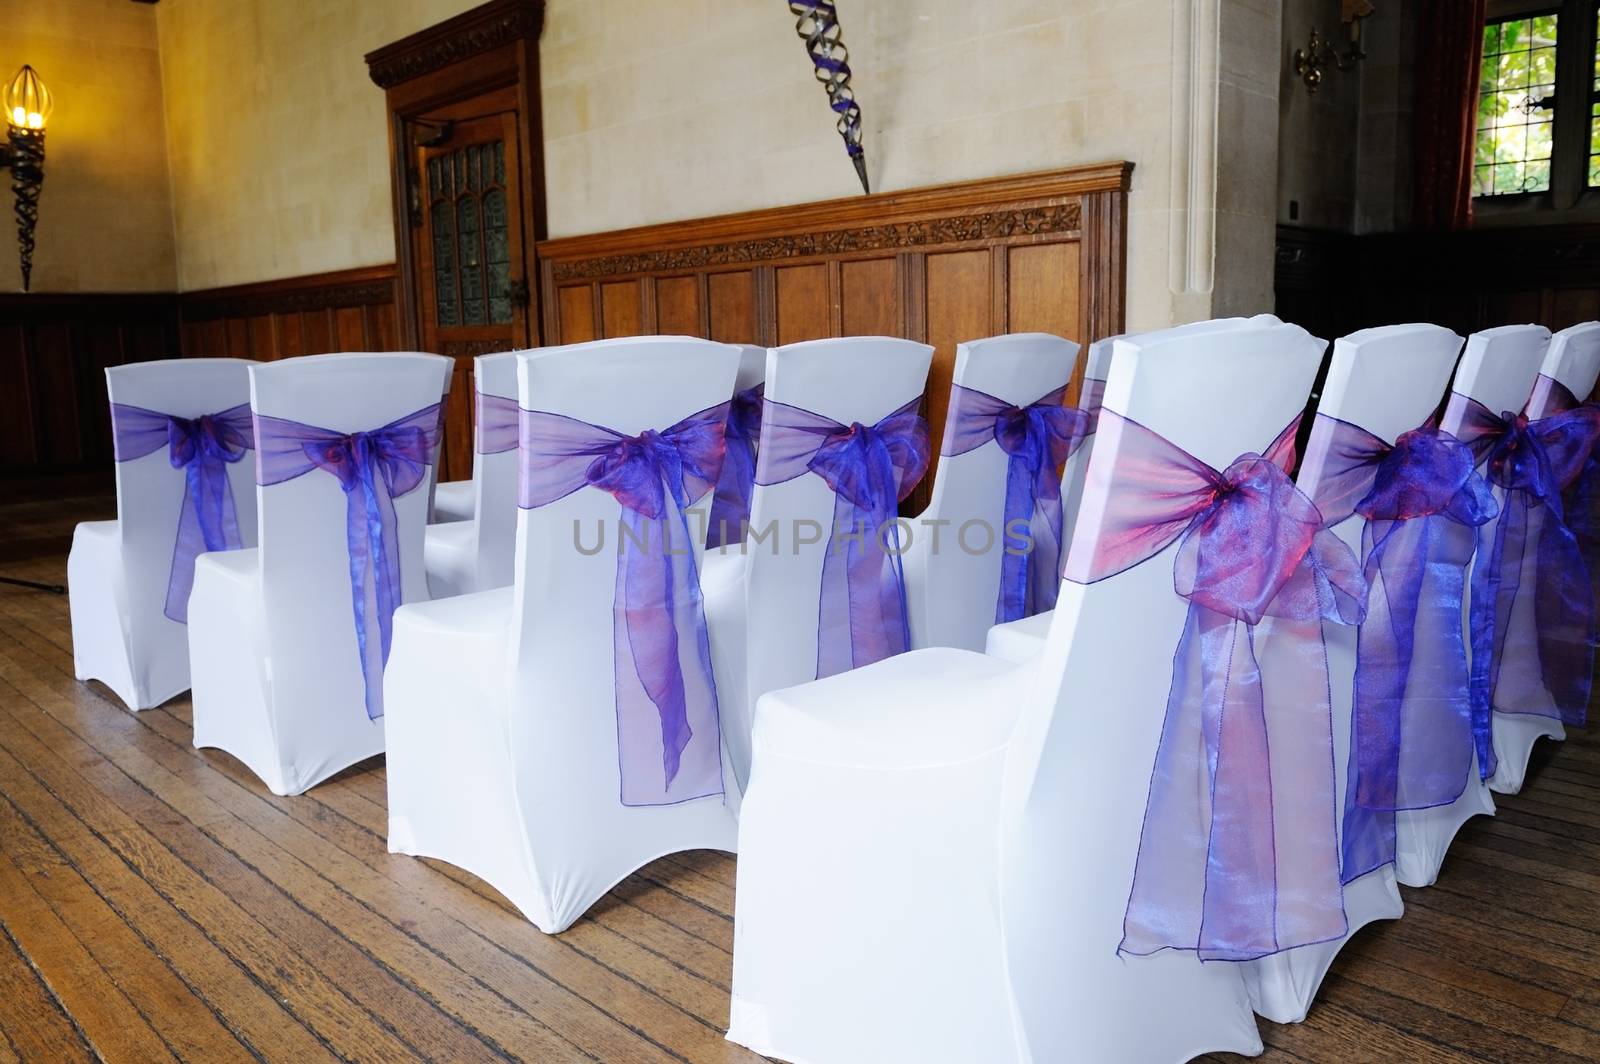 Chairs at wedding ceremony covered in white and purple